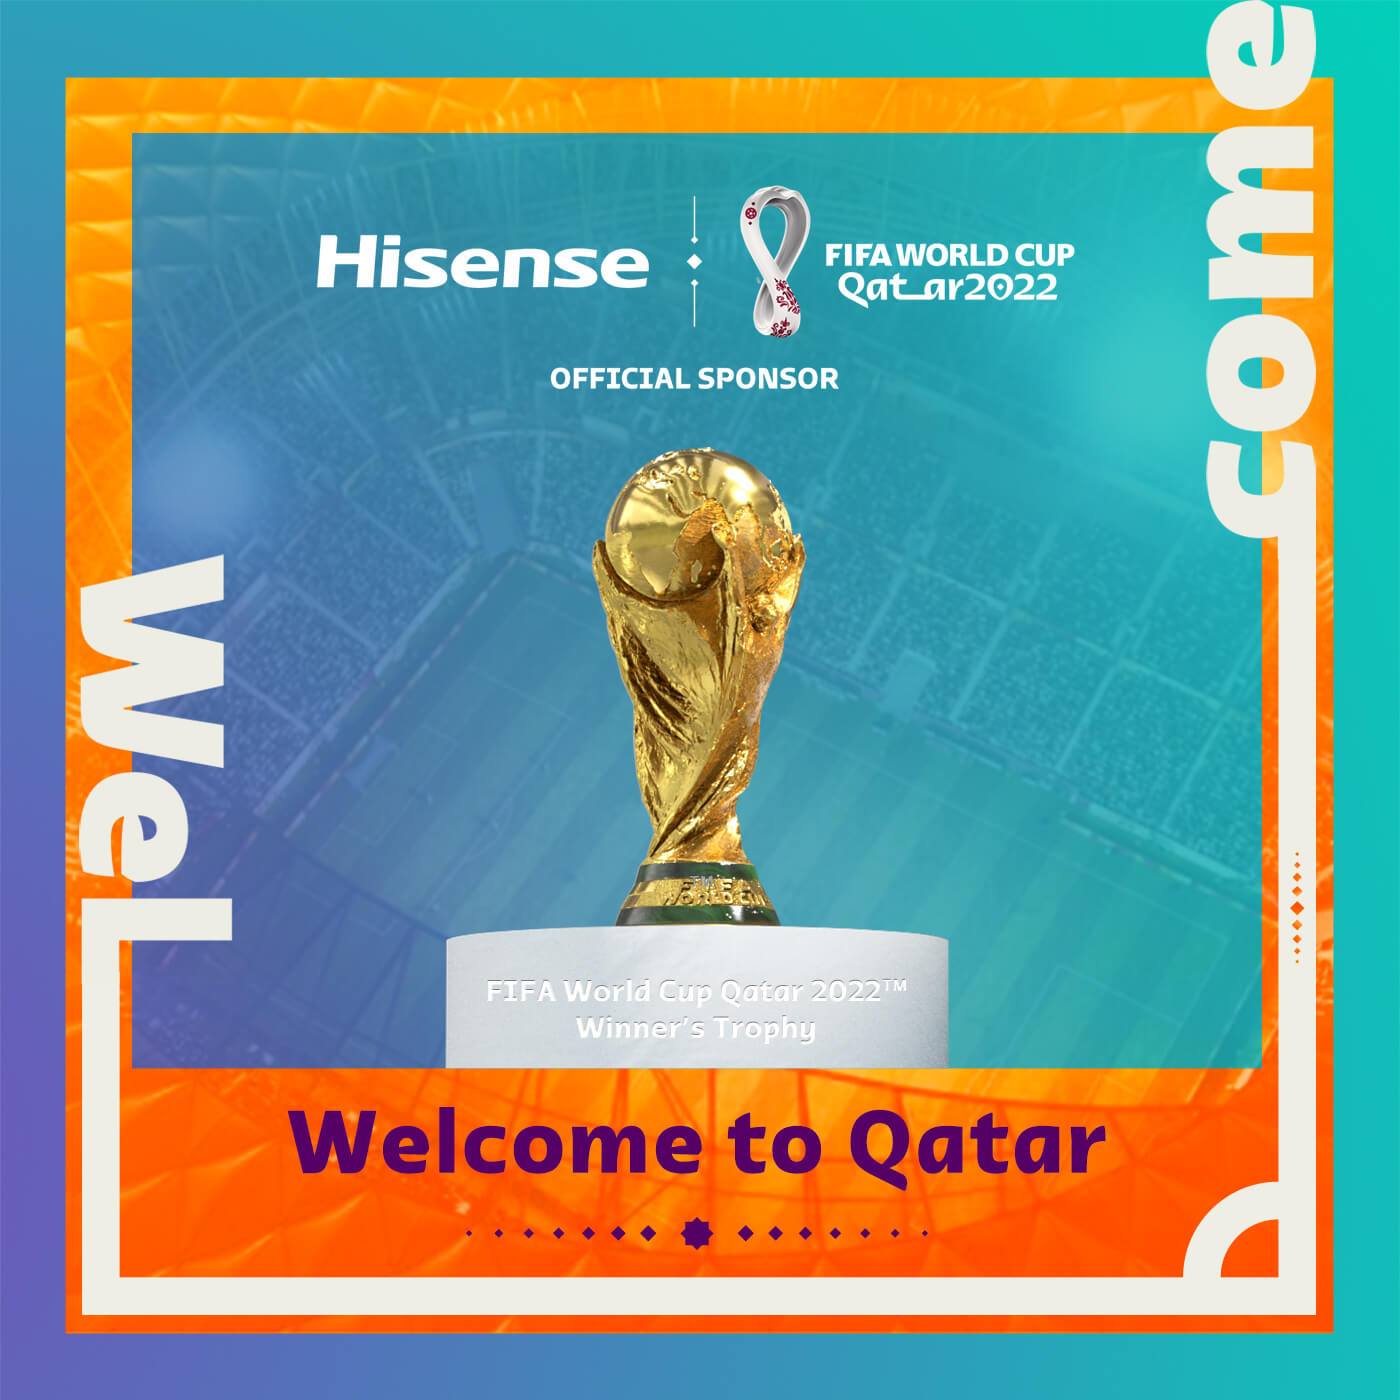 World Cup 2022 wallchart: Download your FREE guide to Qatar